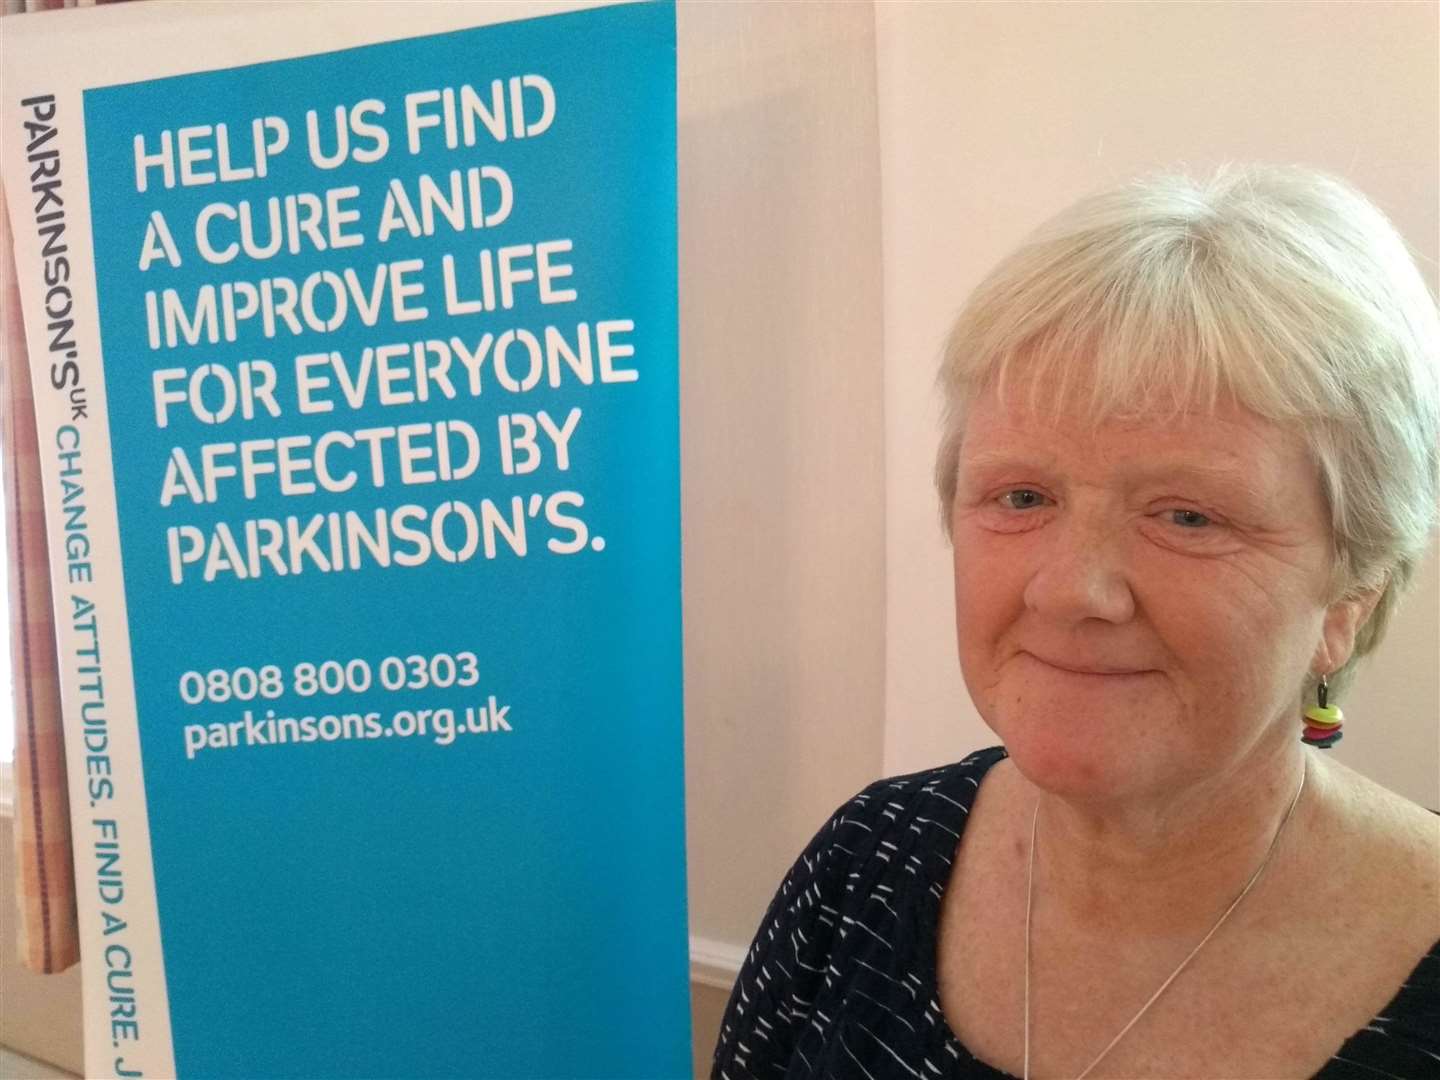 Annie MacLeod, director of Parkinson's UK Scotland, said the new group would be a huge boost to the hundreds of people in the Highlands living with Parkinson’s disease.